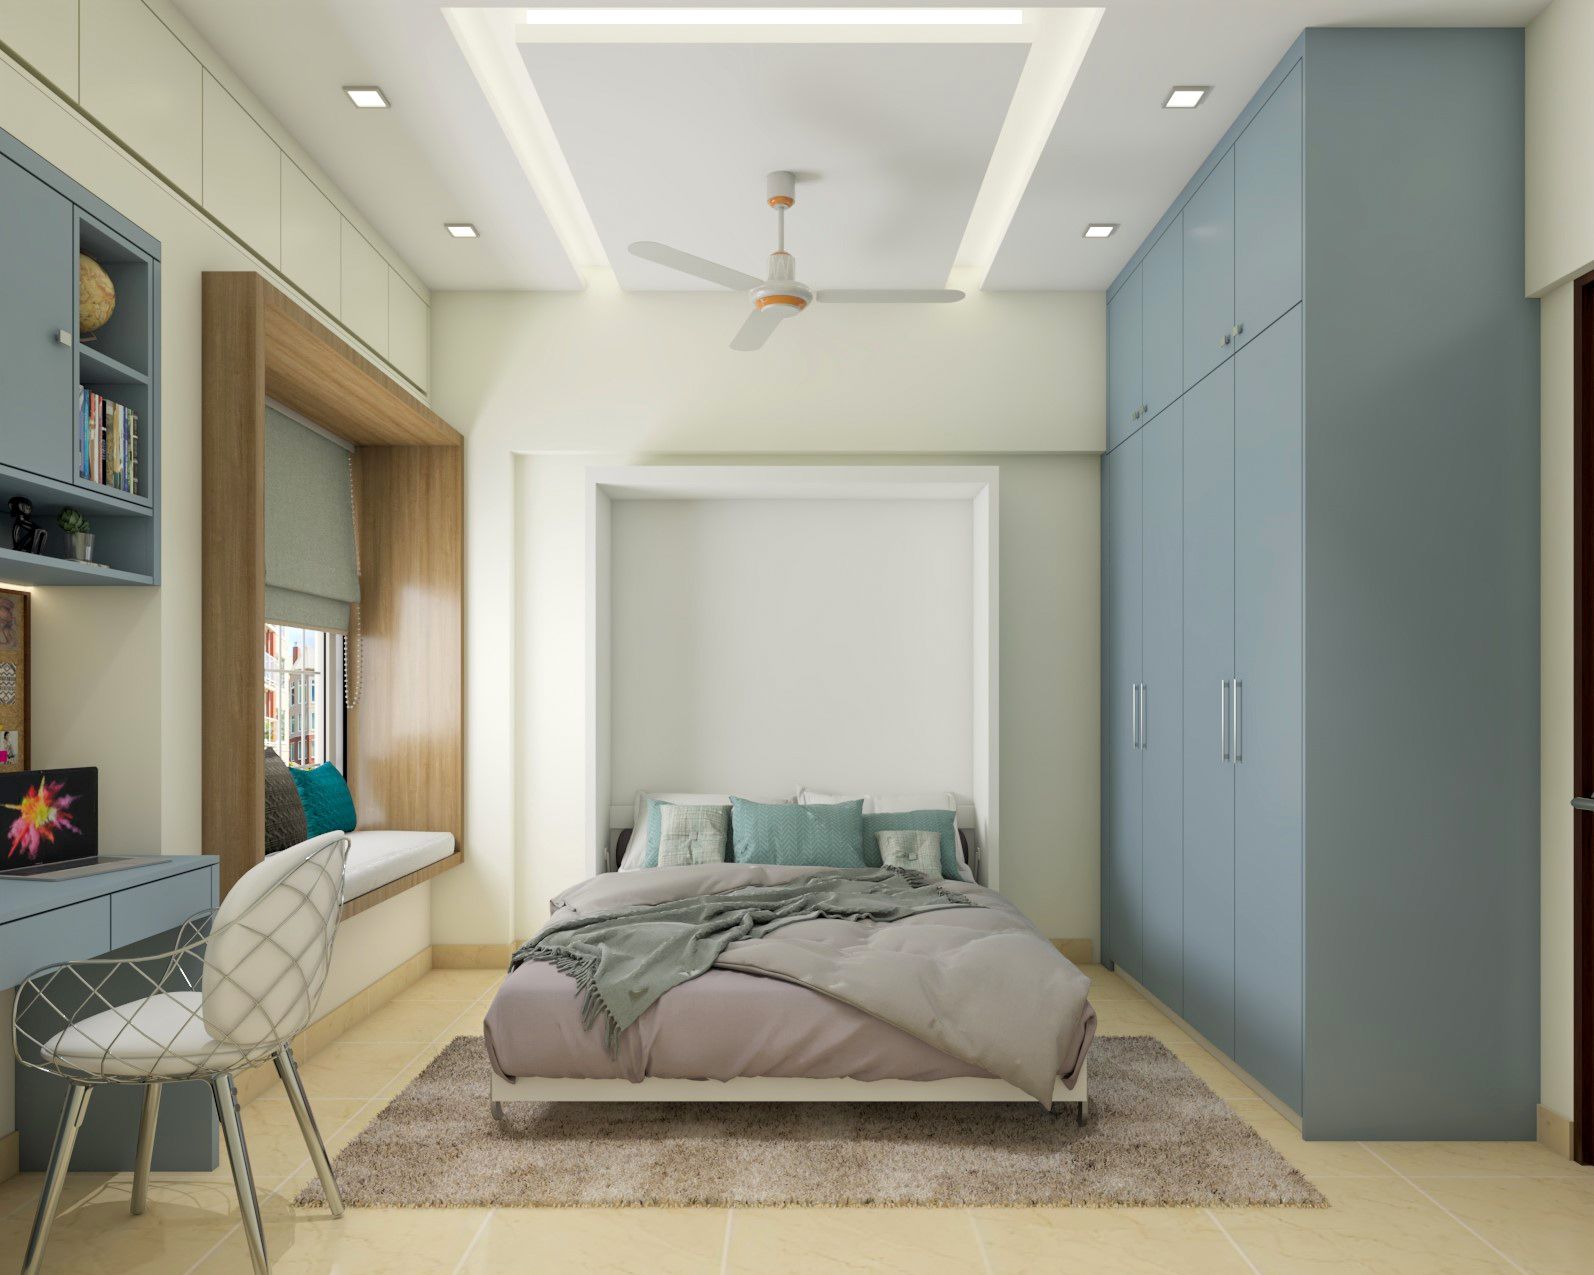 Peripheral Modern False Ceiling Design With Cove And Recessed Lights